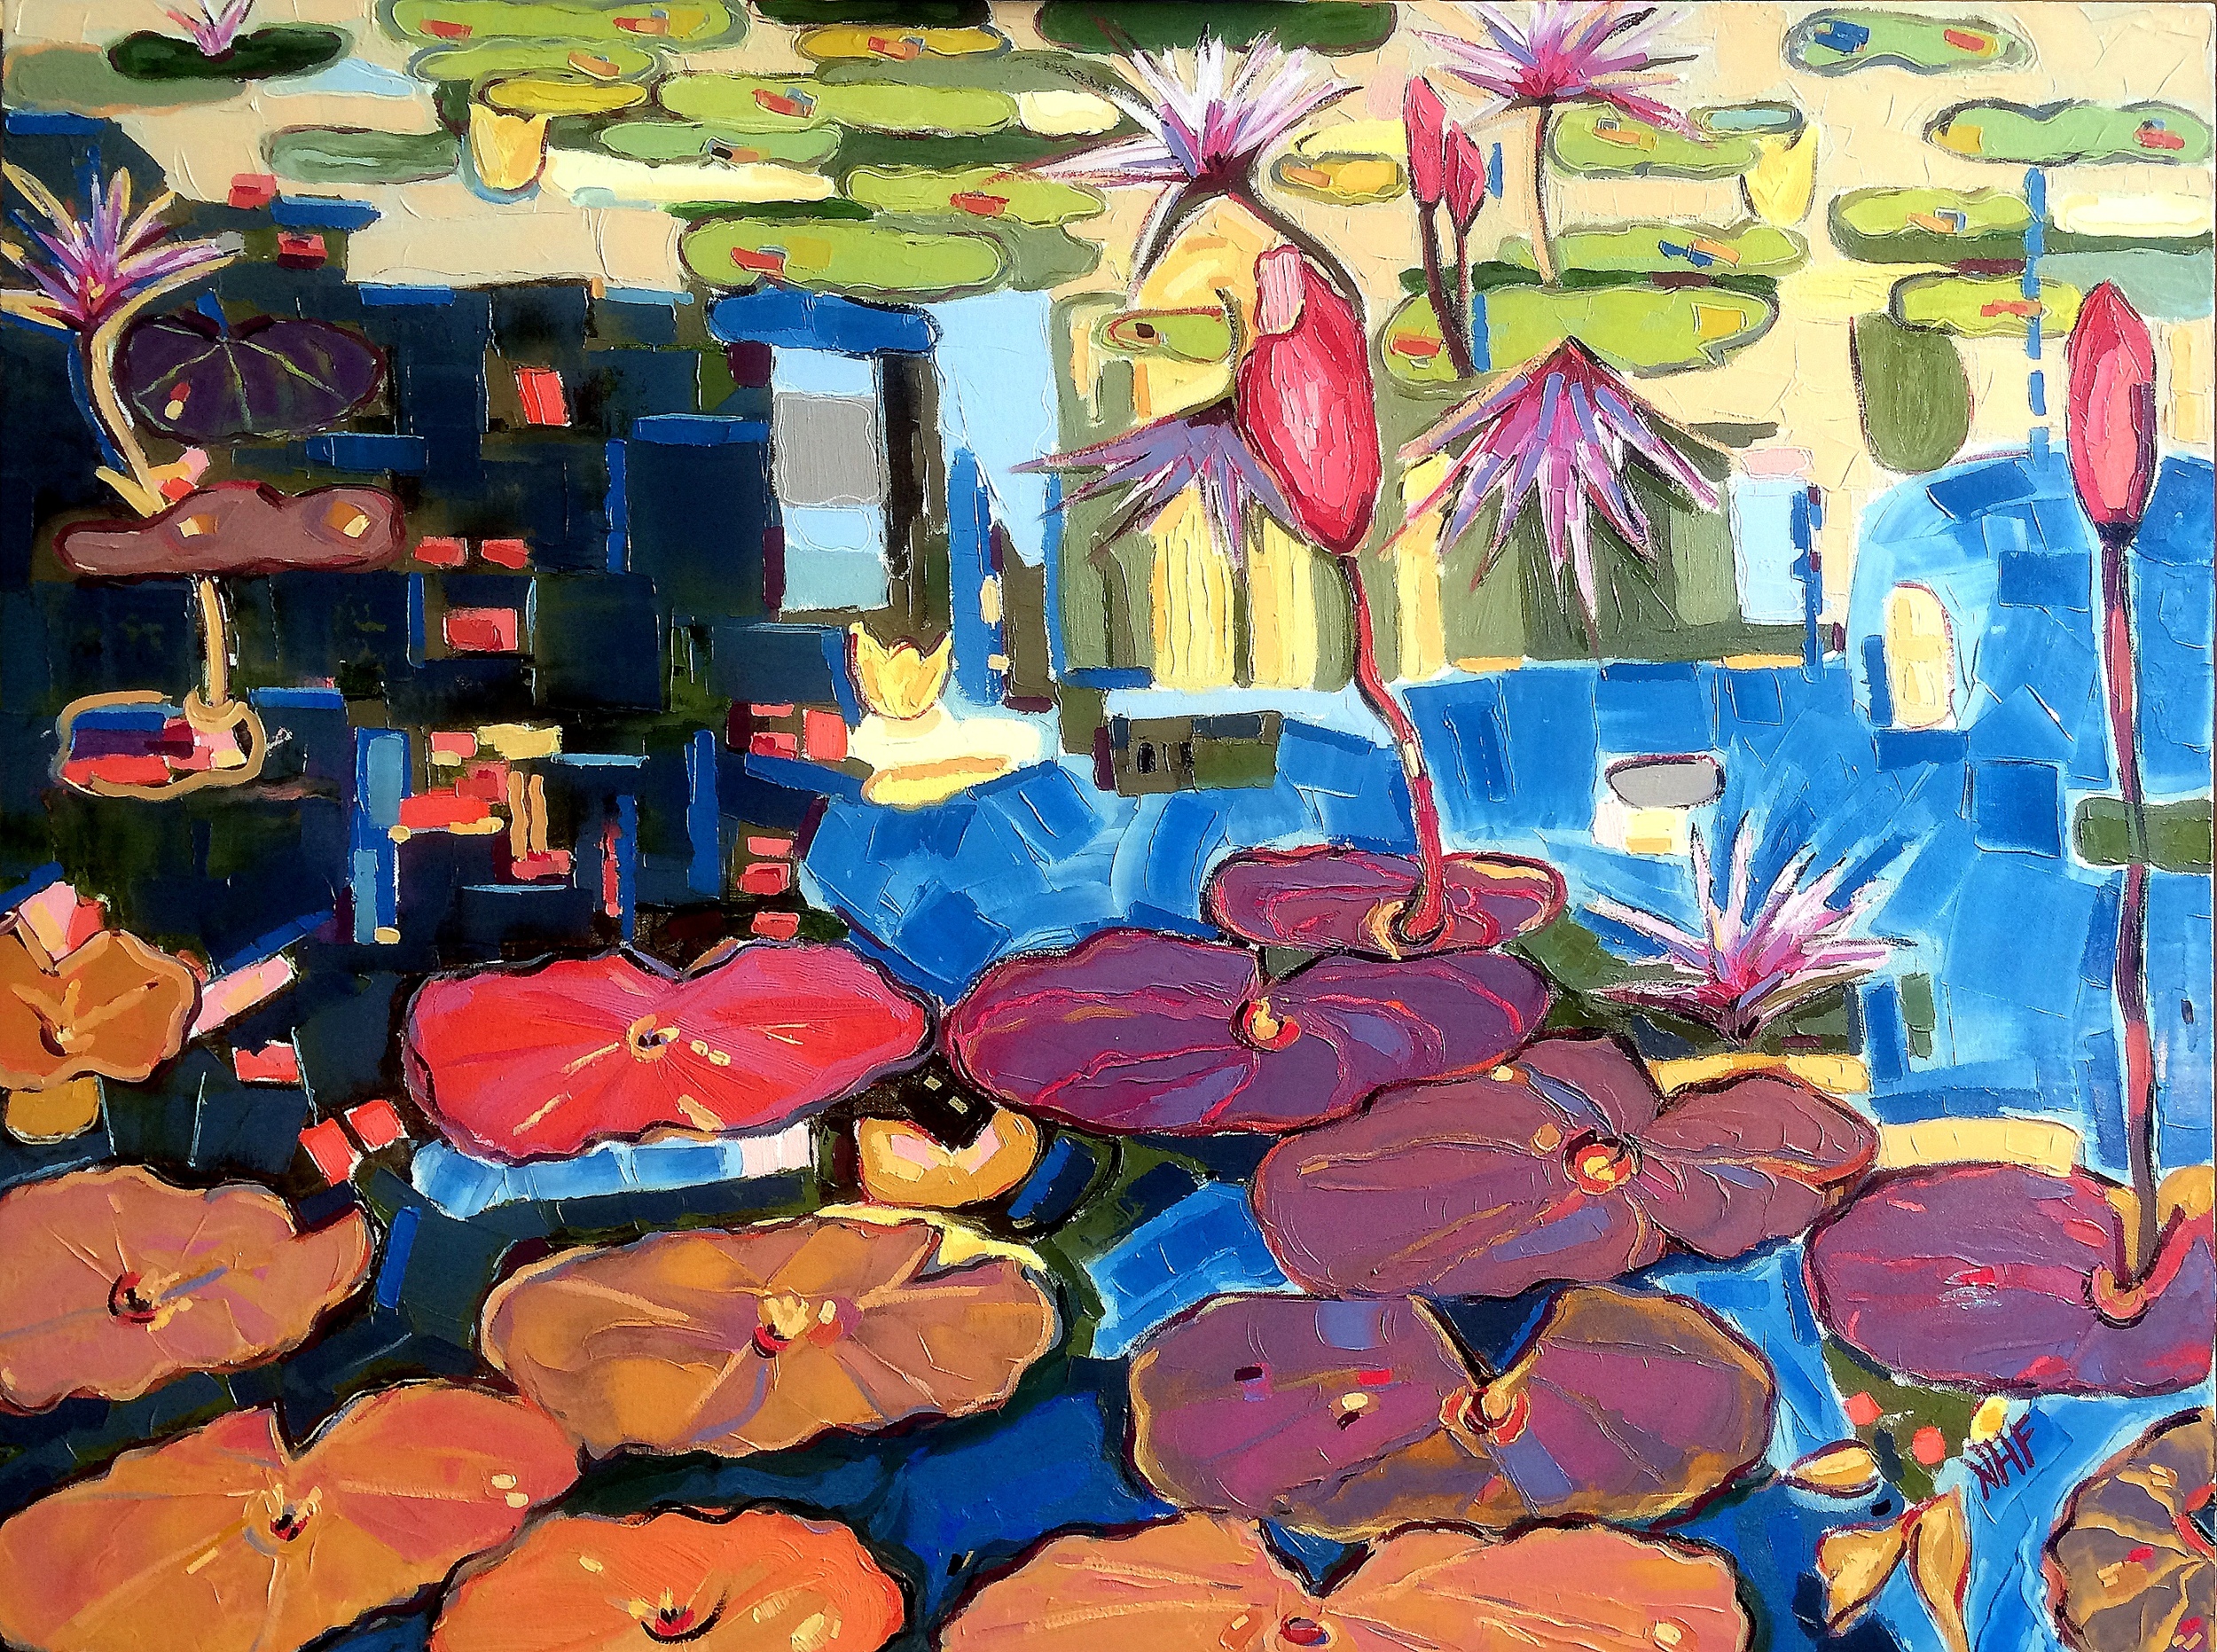  Into the Pond 5, oil on canvas, 36x48 